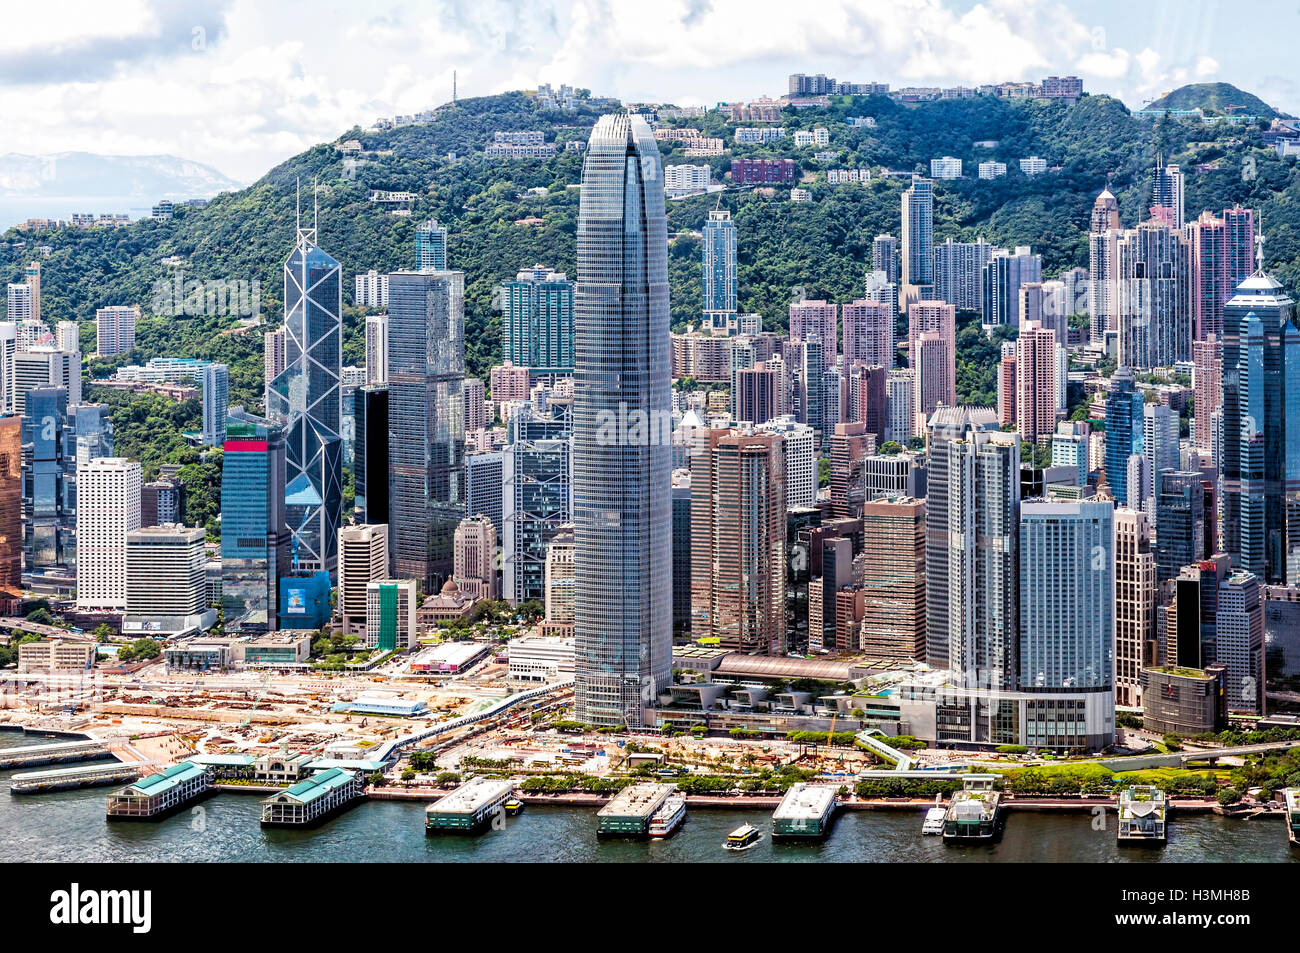 Hong Kong, China - August 23, 2011: Aerial view of Hong Kong Central District, China. Central is the business district of HK Stock Photo